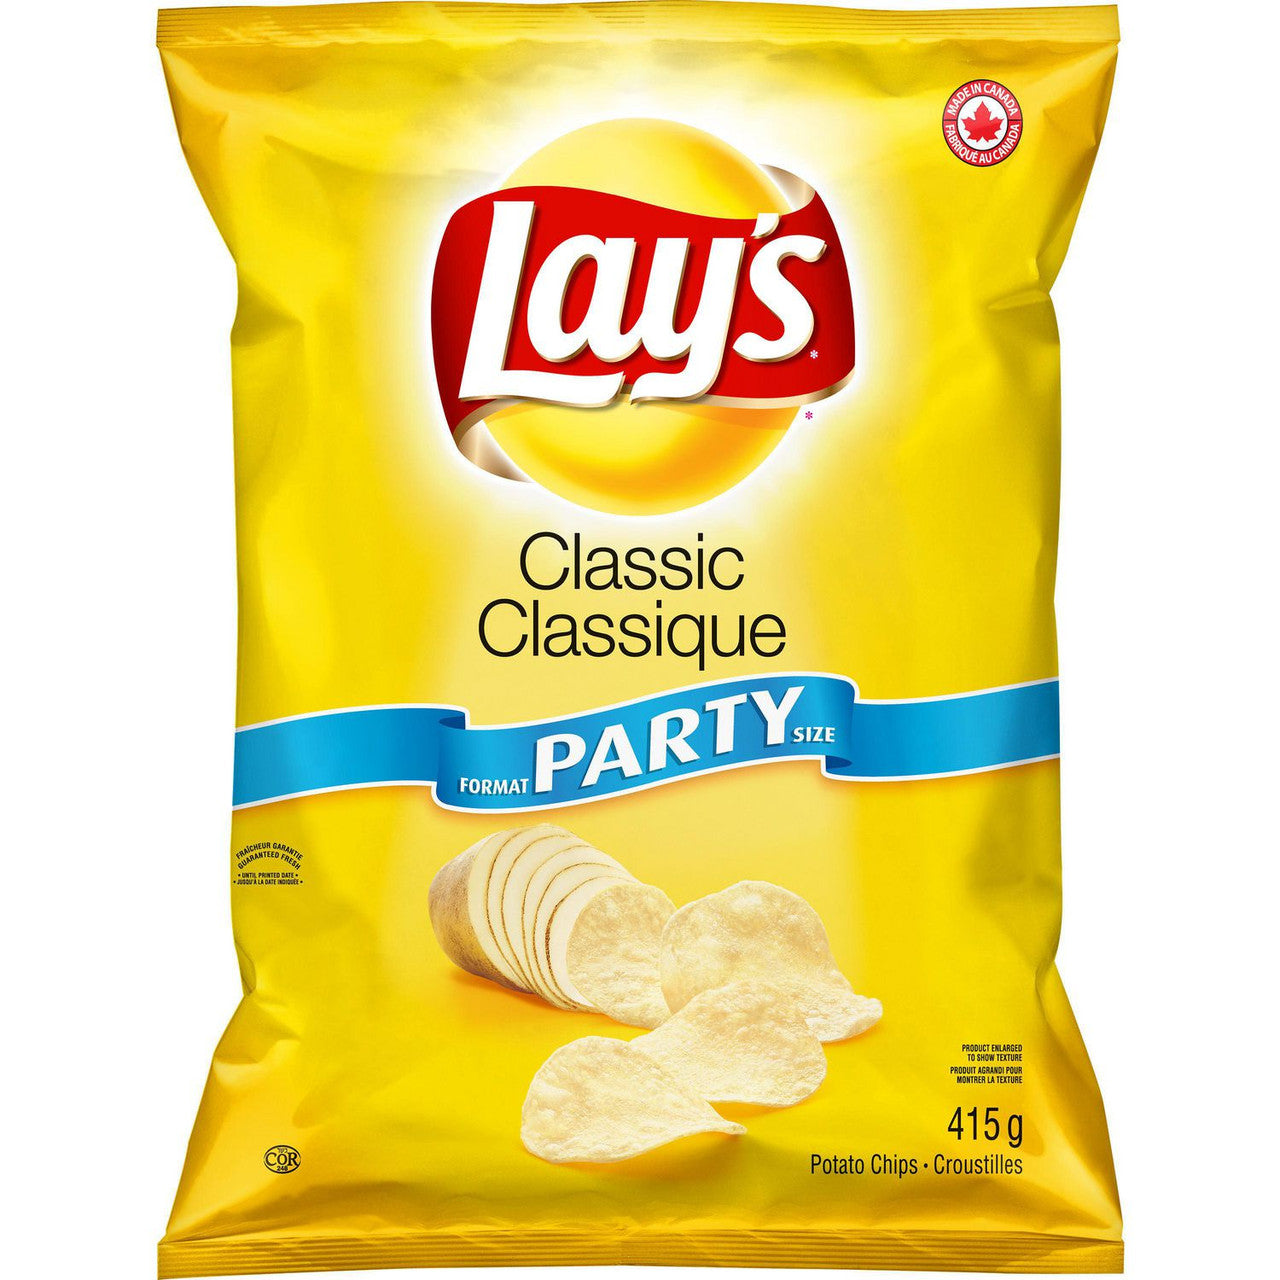 Lay's Classic Potato Chips, 415g/14.6 oz Bag, (Imported from Canada)